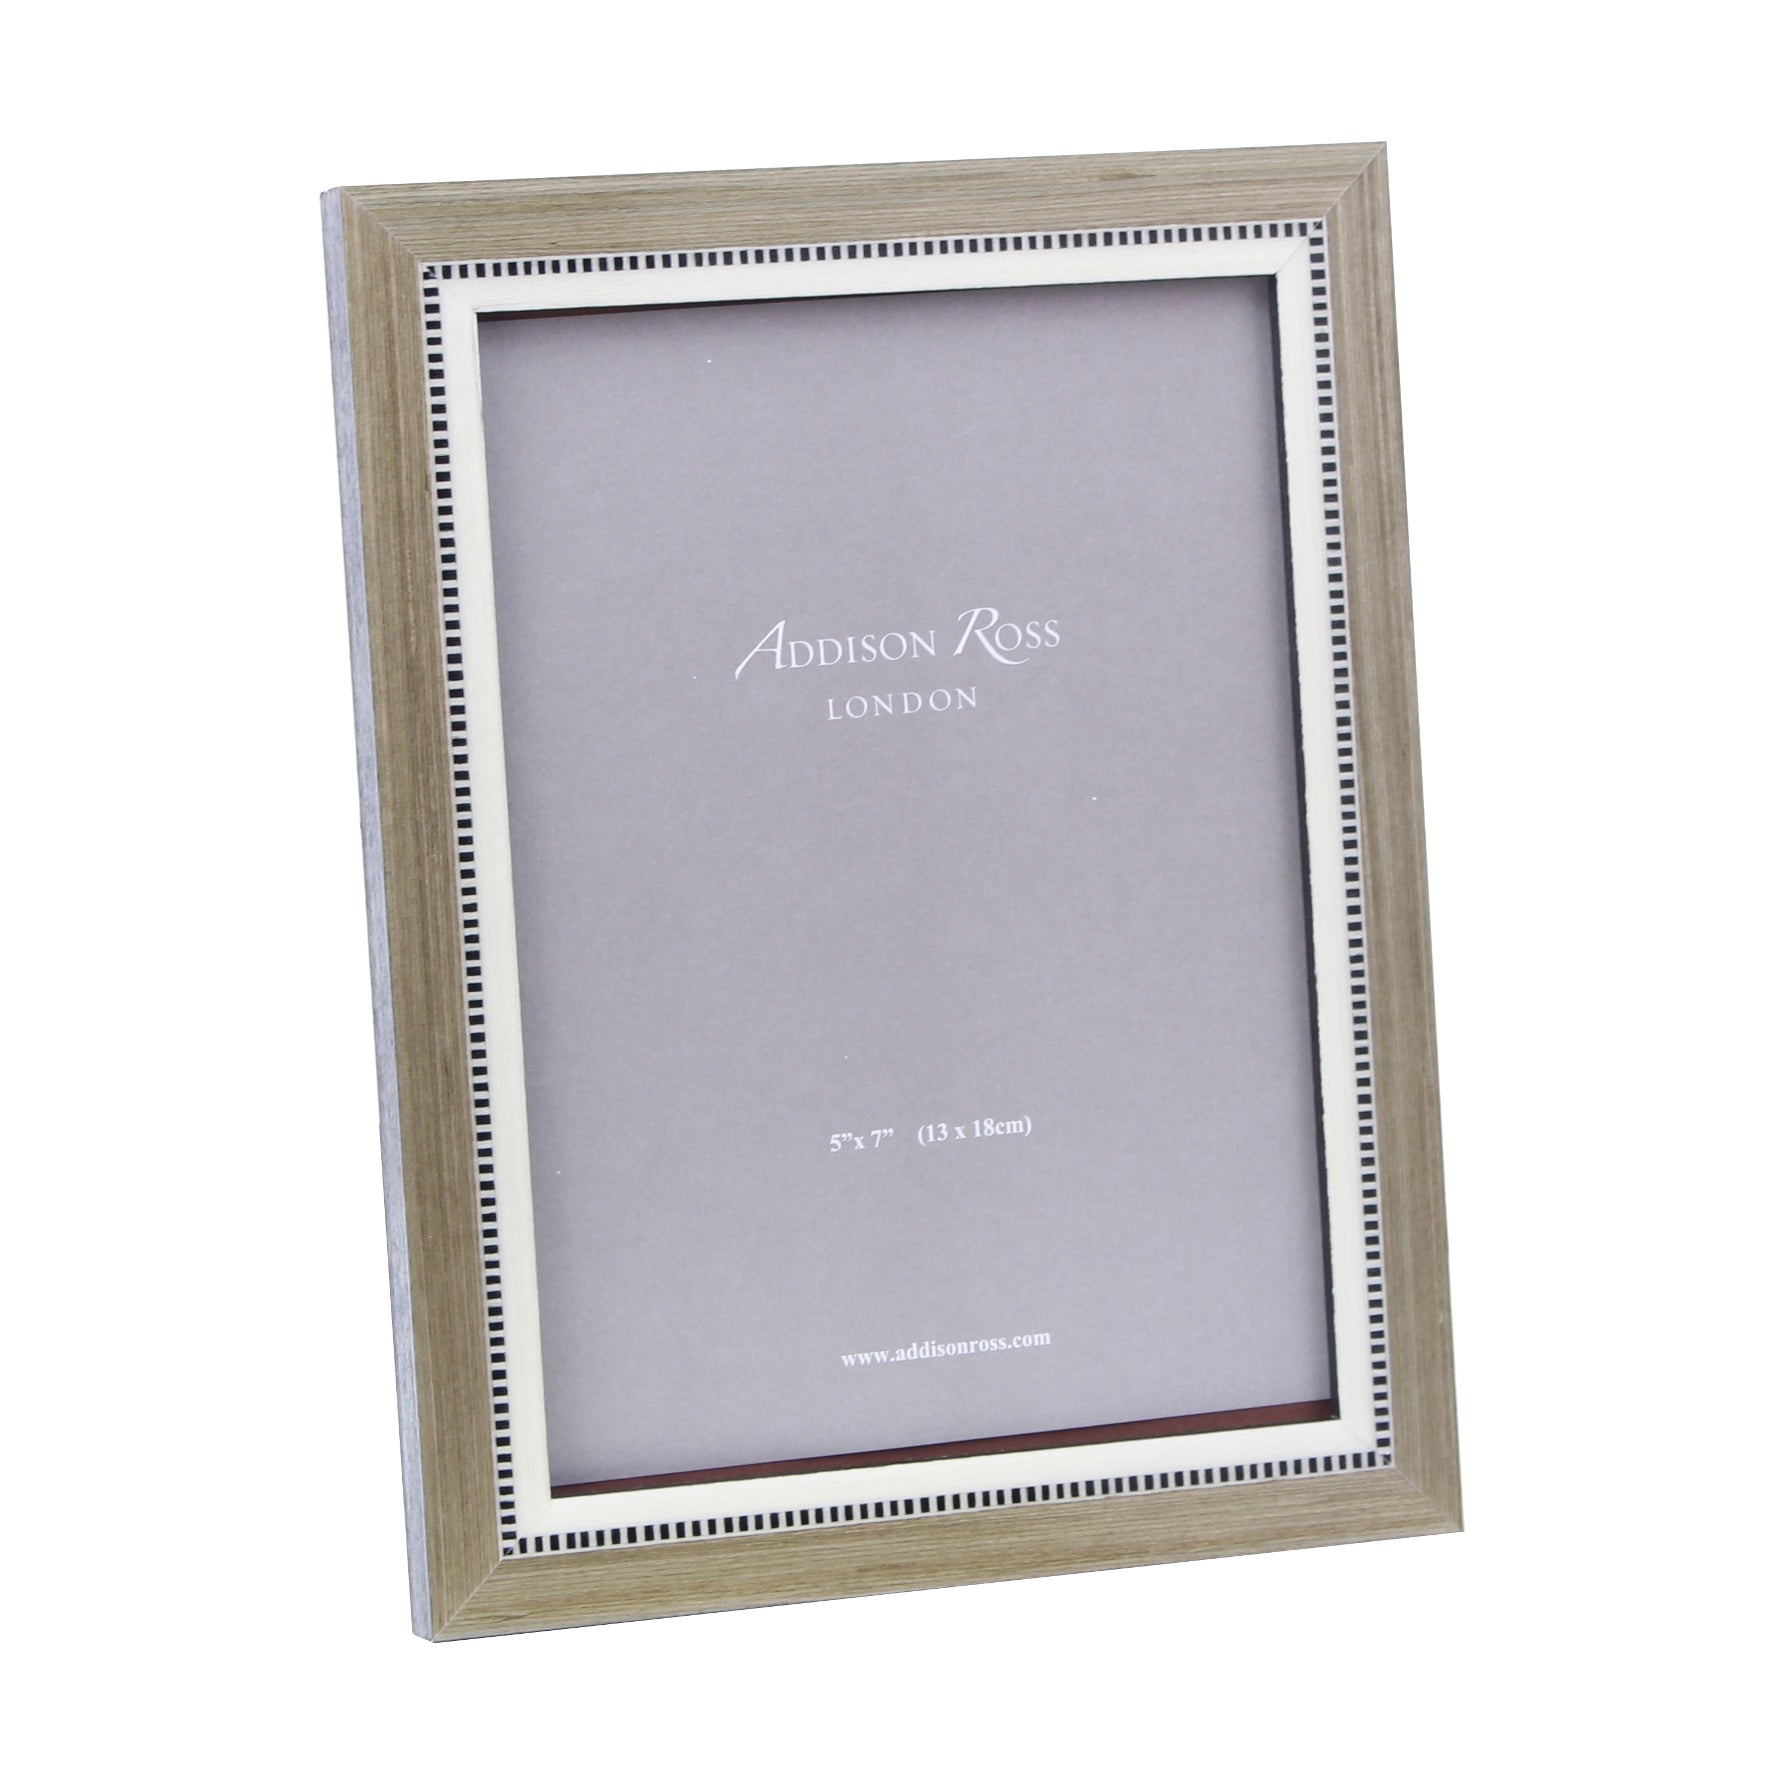 5x7 in. Marquetry Frame - Gray & White Wood Veneer and Mother of Pearl